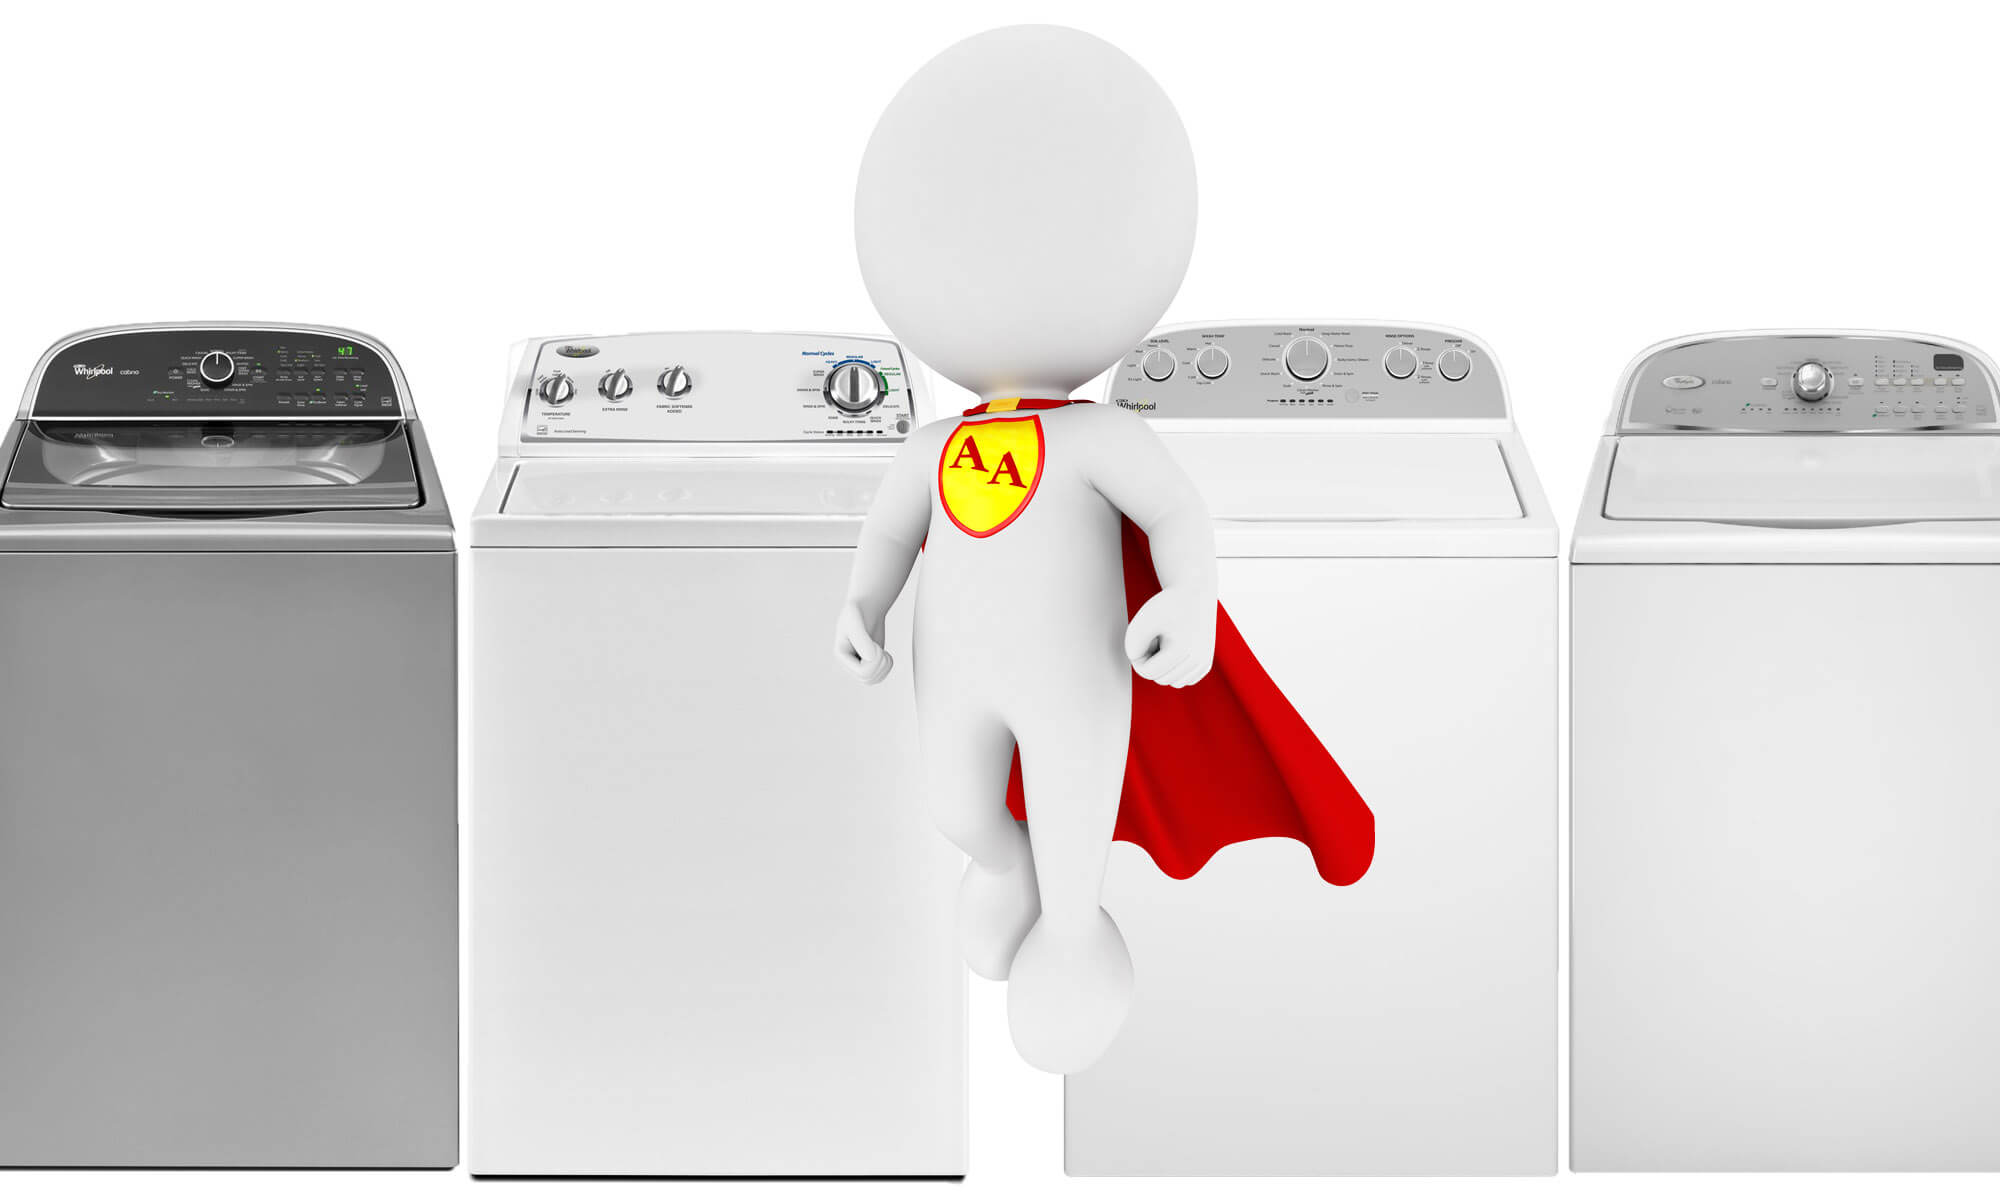 Direct Drive Washer Repair Applianceassistant Com Applianceassistant Com